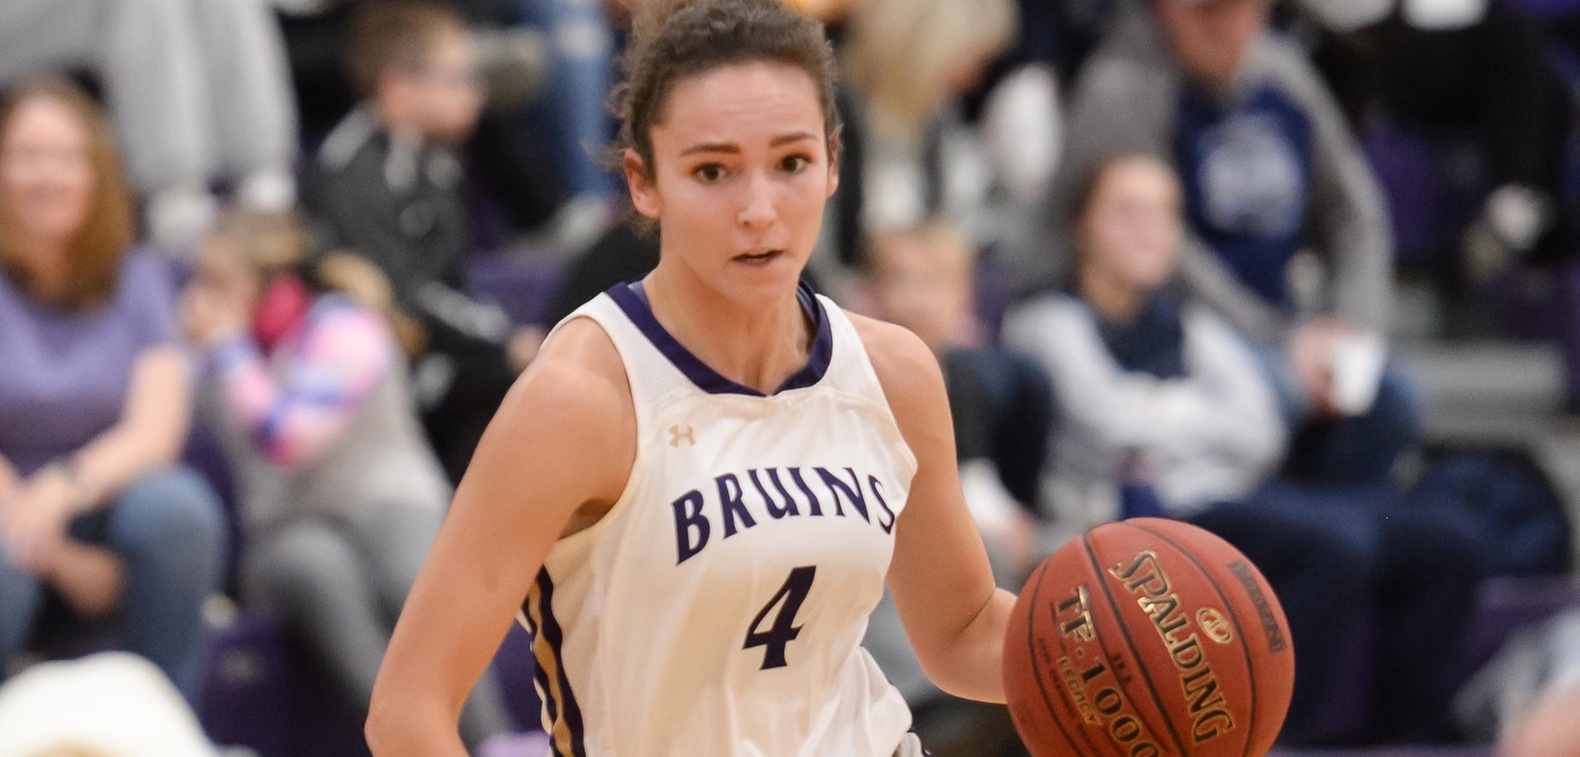 Lexi Allen led the Bruins with a season-high 15 points.